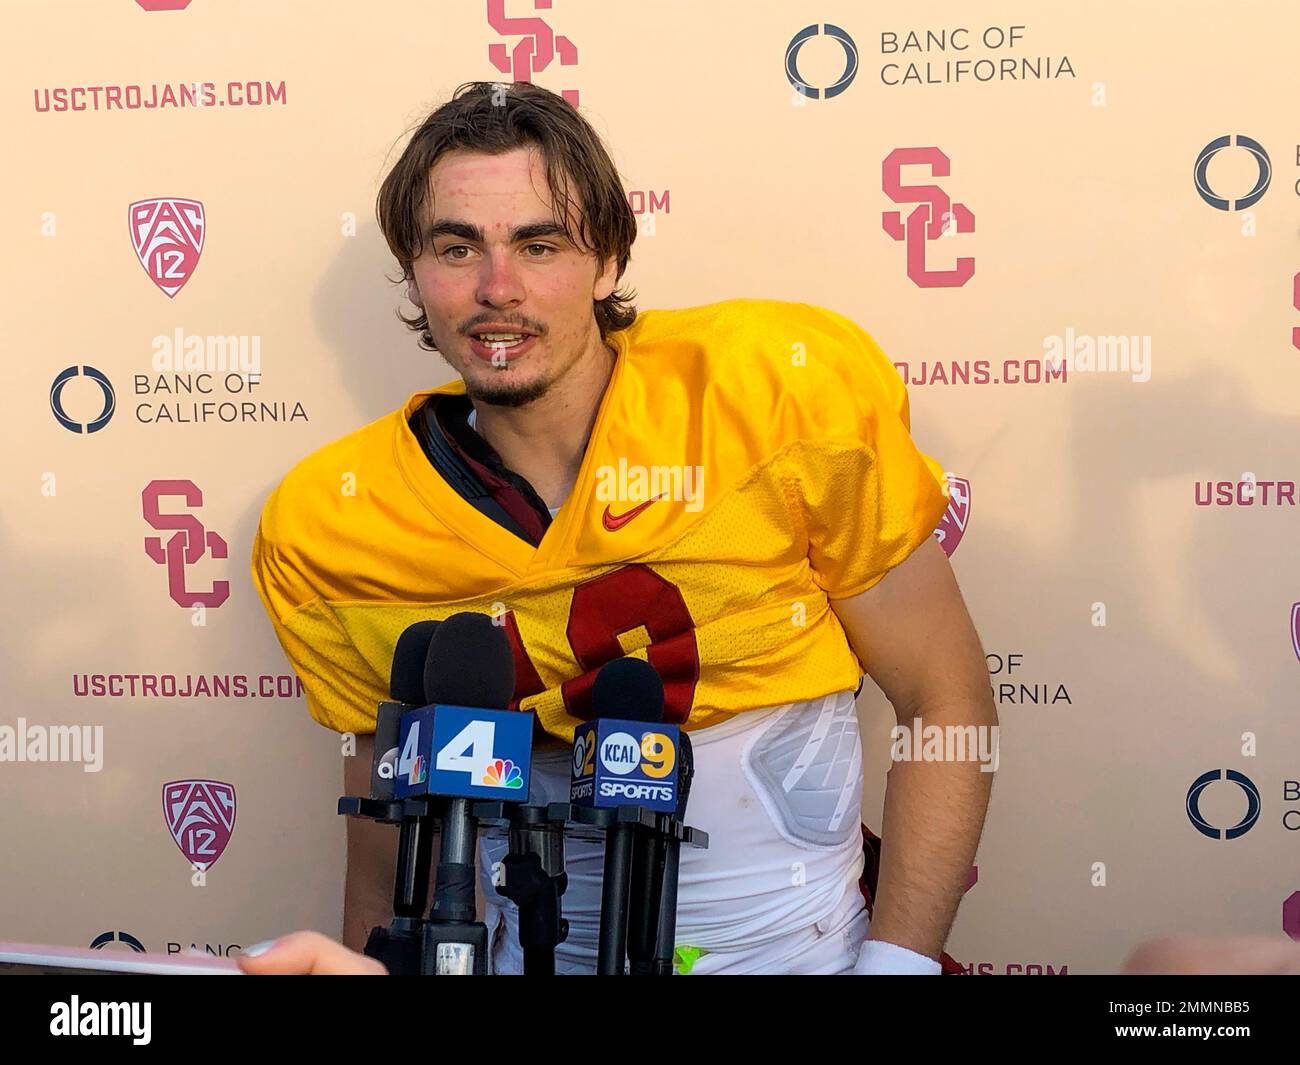 Southern California quarterback J.T. Daniels speaks to reporters following his first NCAA college football practice after winning the Trojans' starting job, Tuesday, Aug. 28, 2018, in Los Angeles. The 18-year-old Daniels will be the first true freshman to start at quarterback for USC's powerhouse program since 2009. (AP Photo/Greg Beacham) Foto Stock